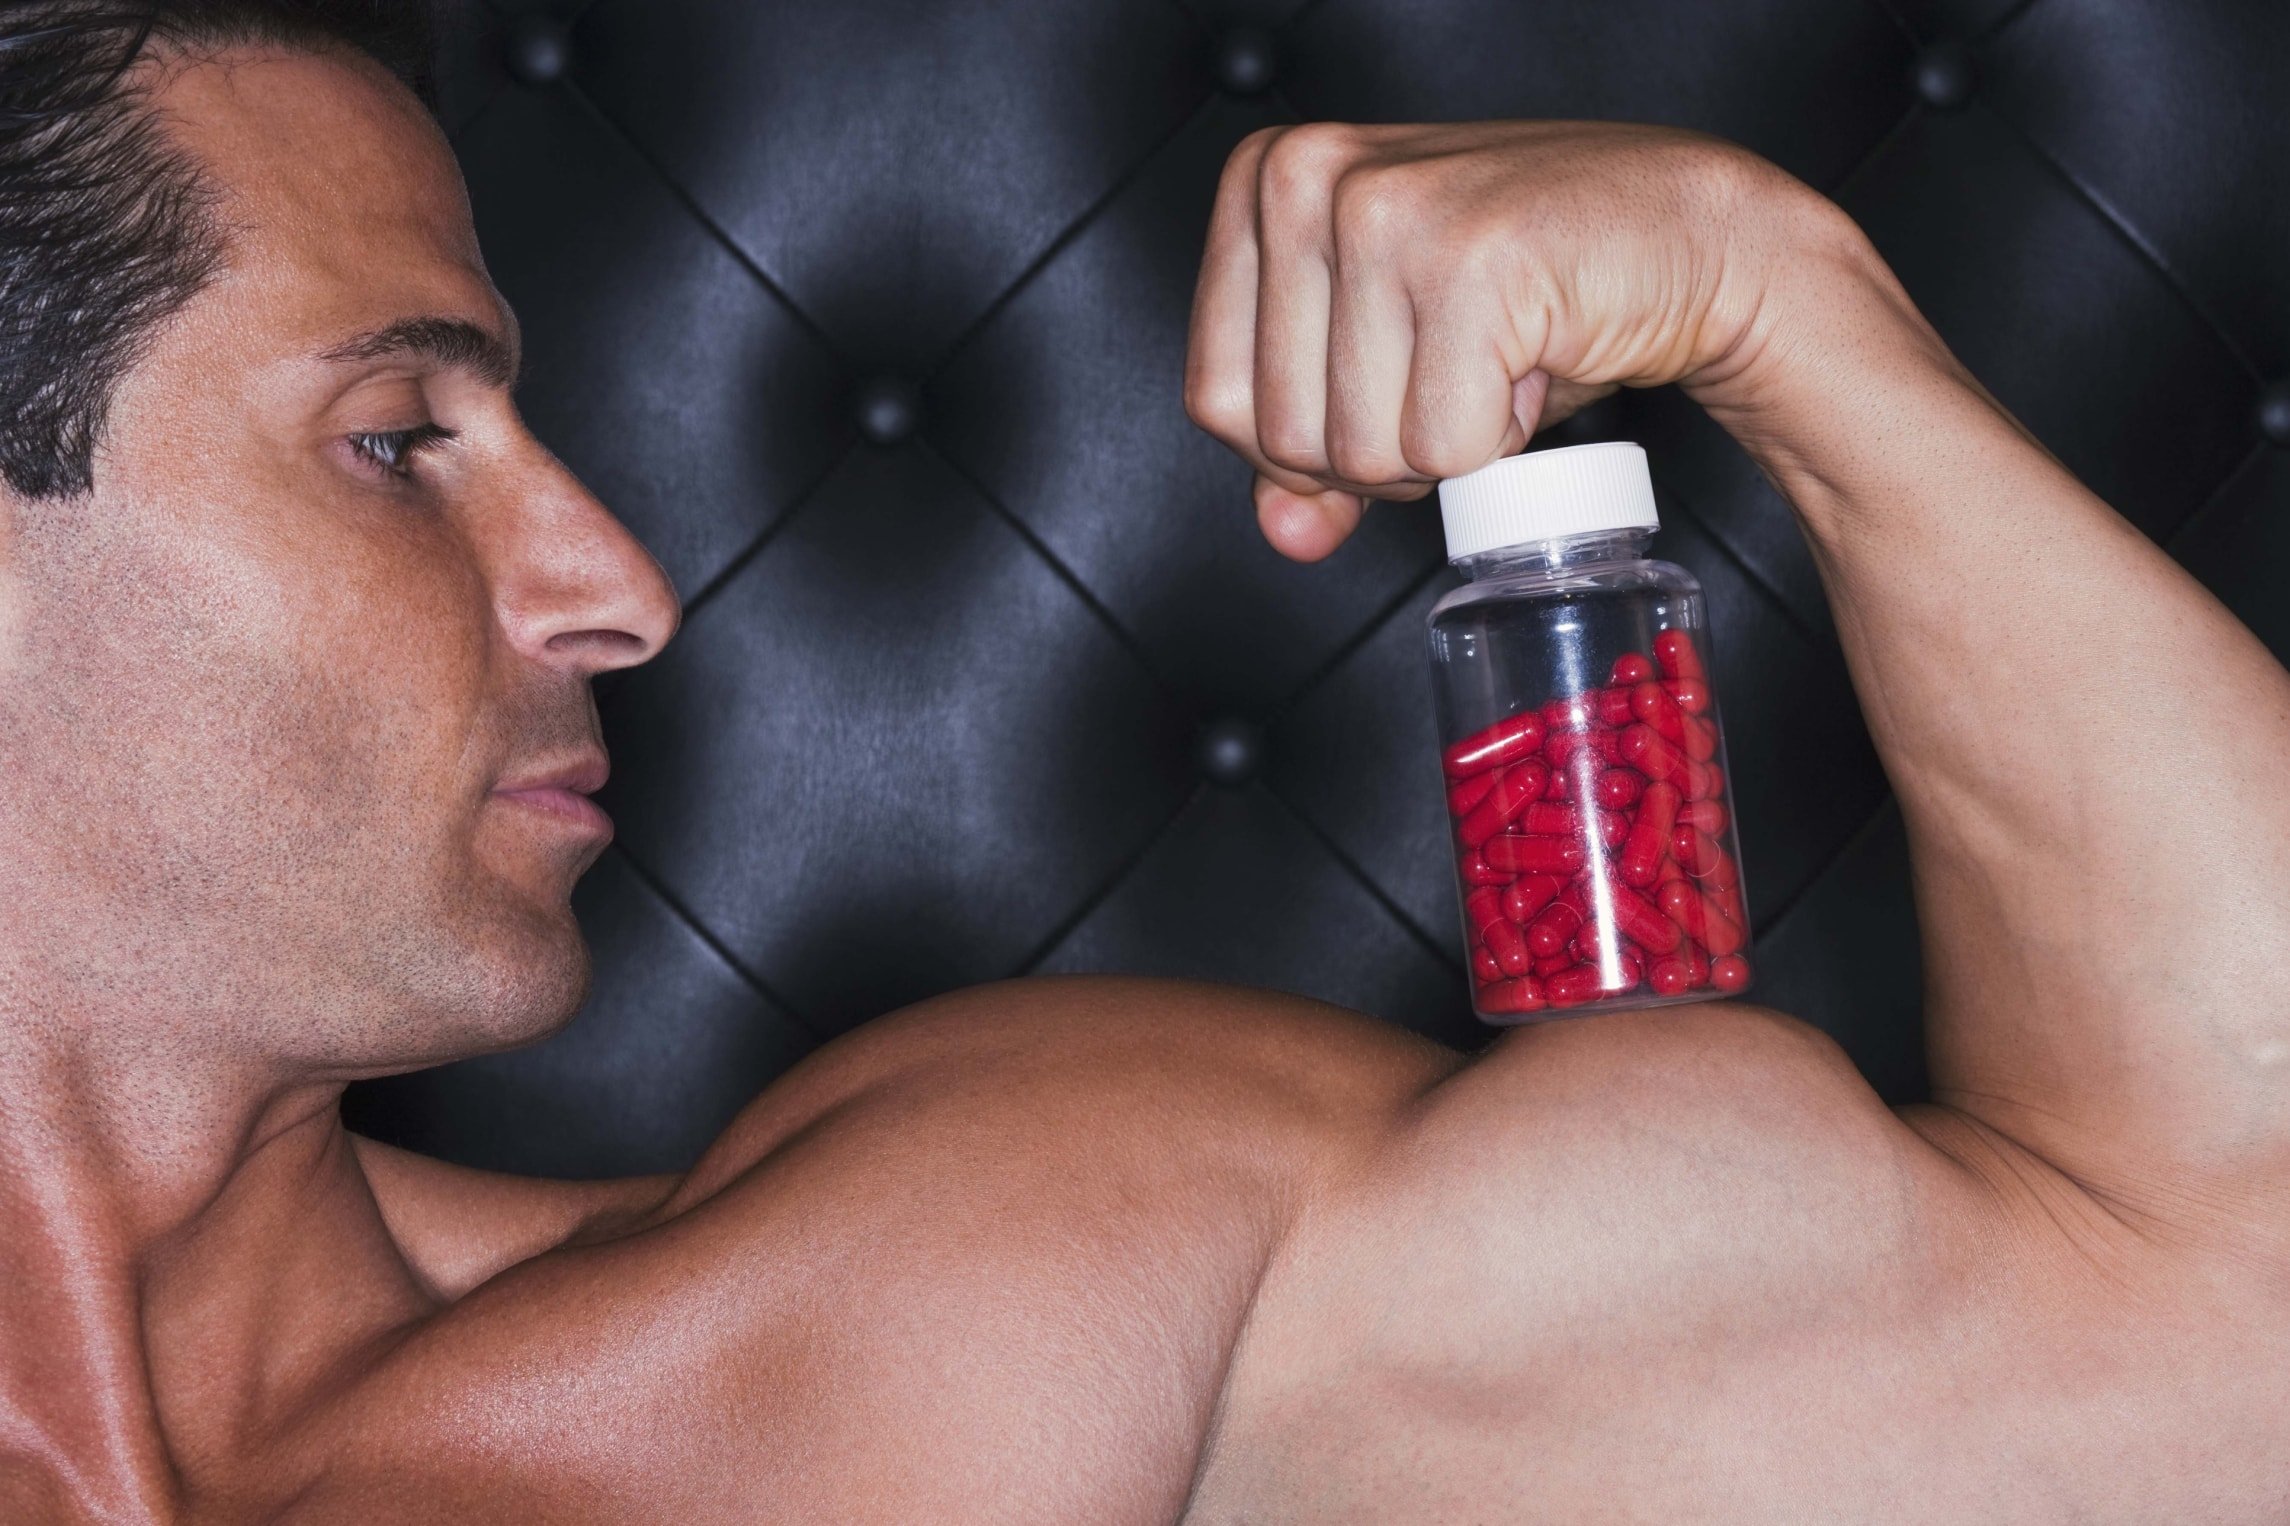 The Truth About Anabolic Steroids: Facts and Myths